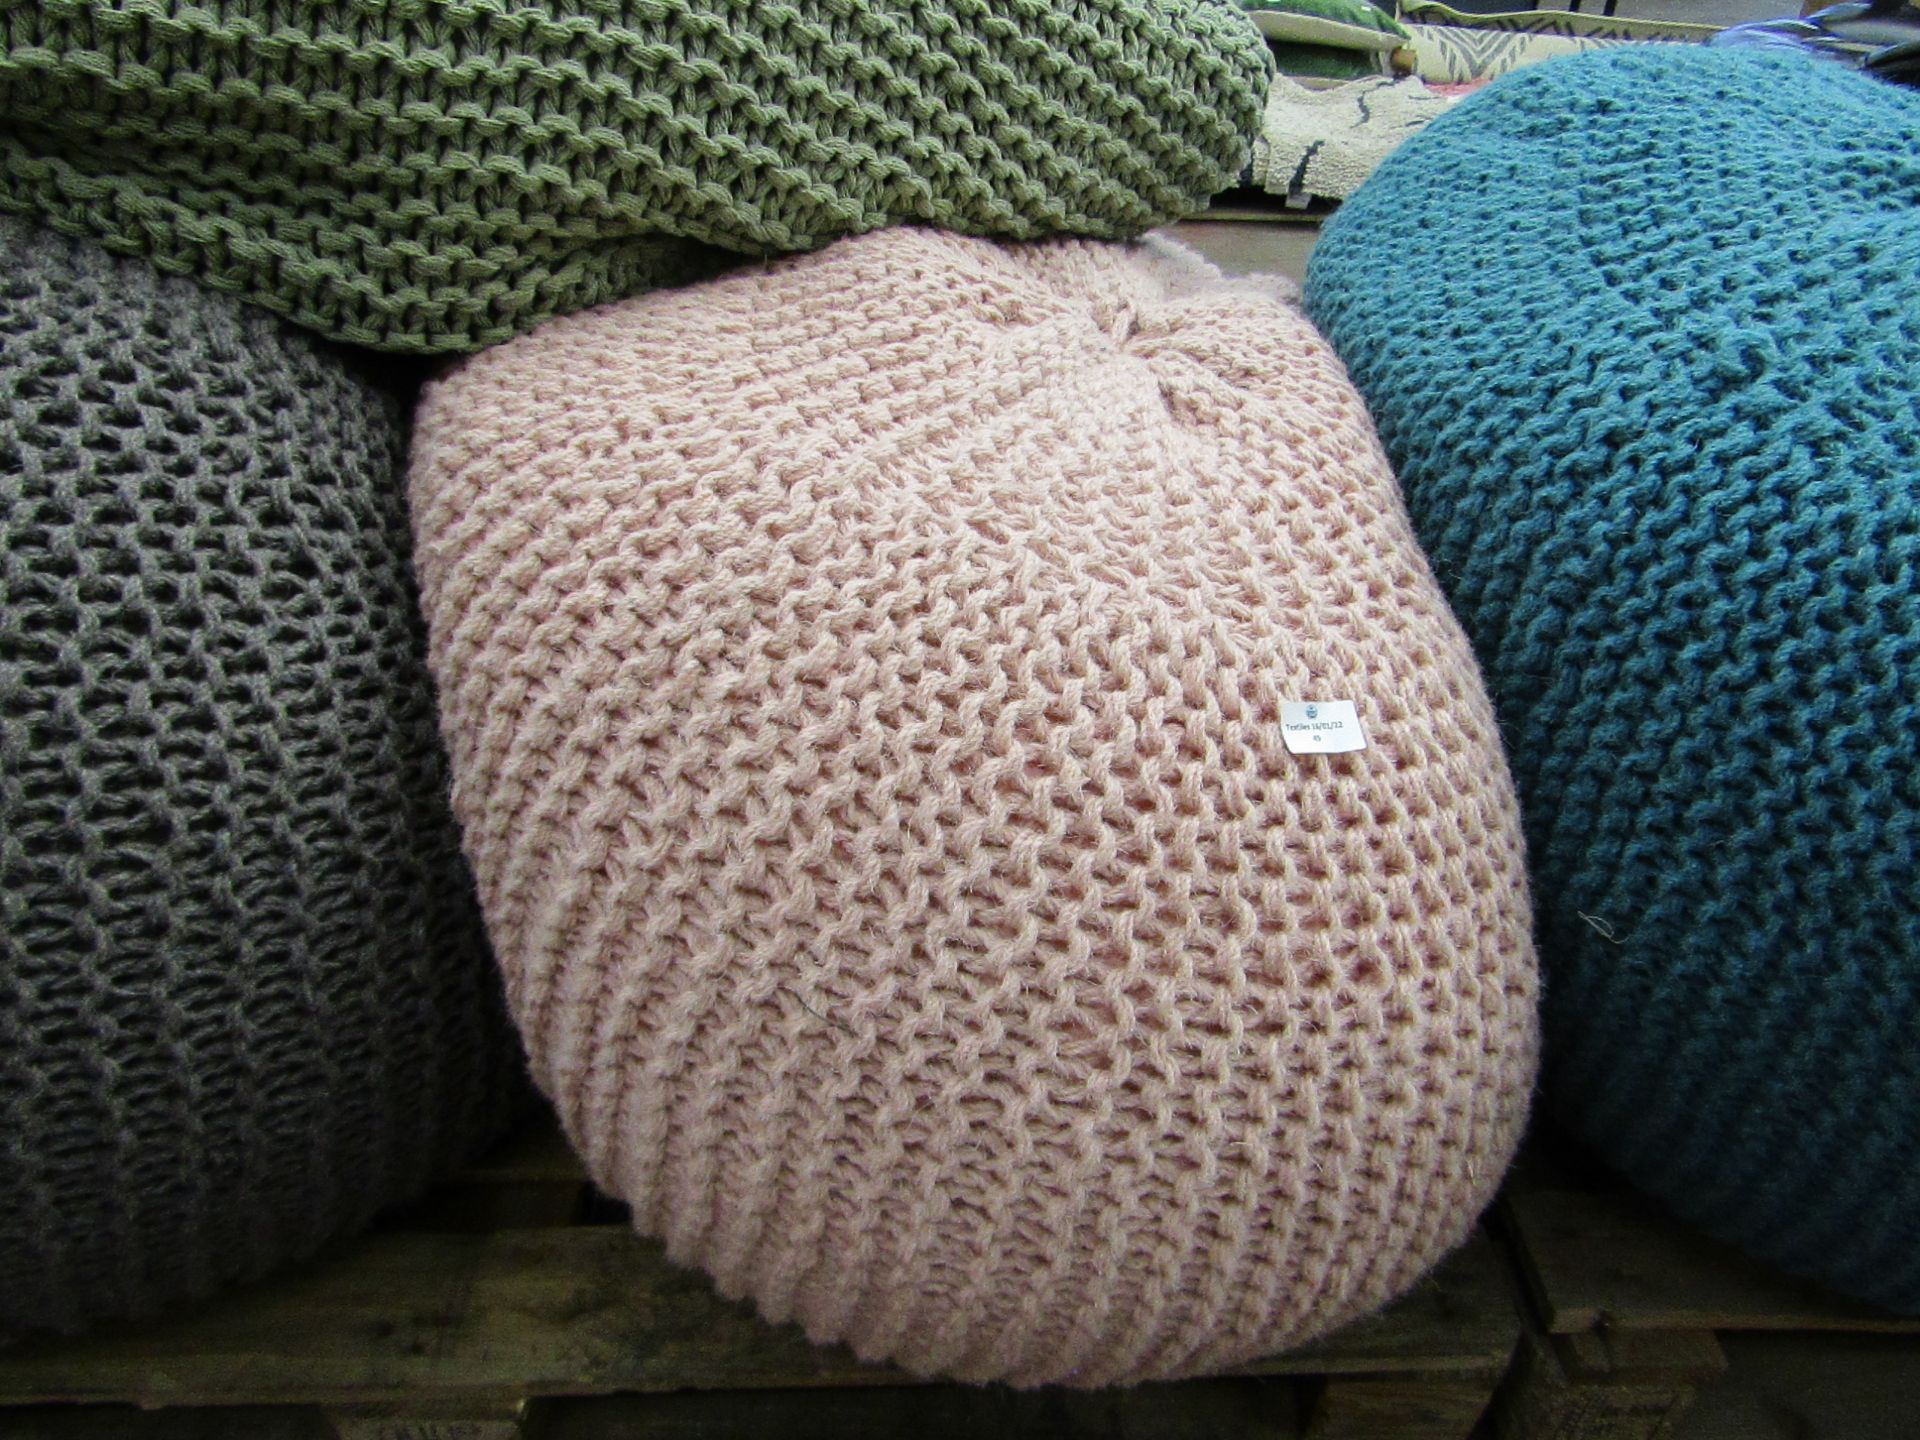 | 1X | MADE.COM 100% KNITTED COCOON BEANBAG, PINK | UNCHECKED & UNPACKAGED |